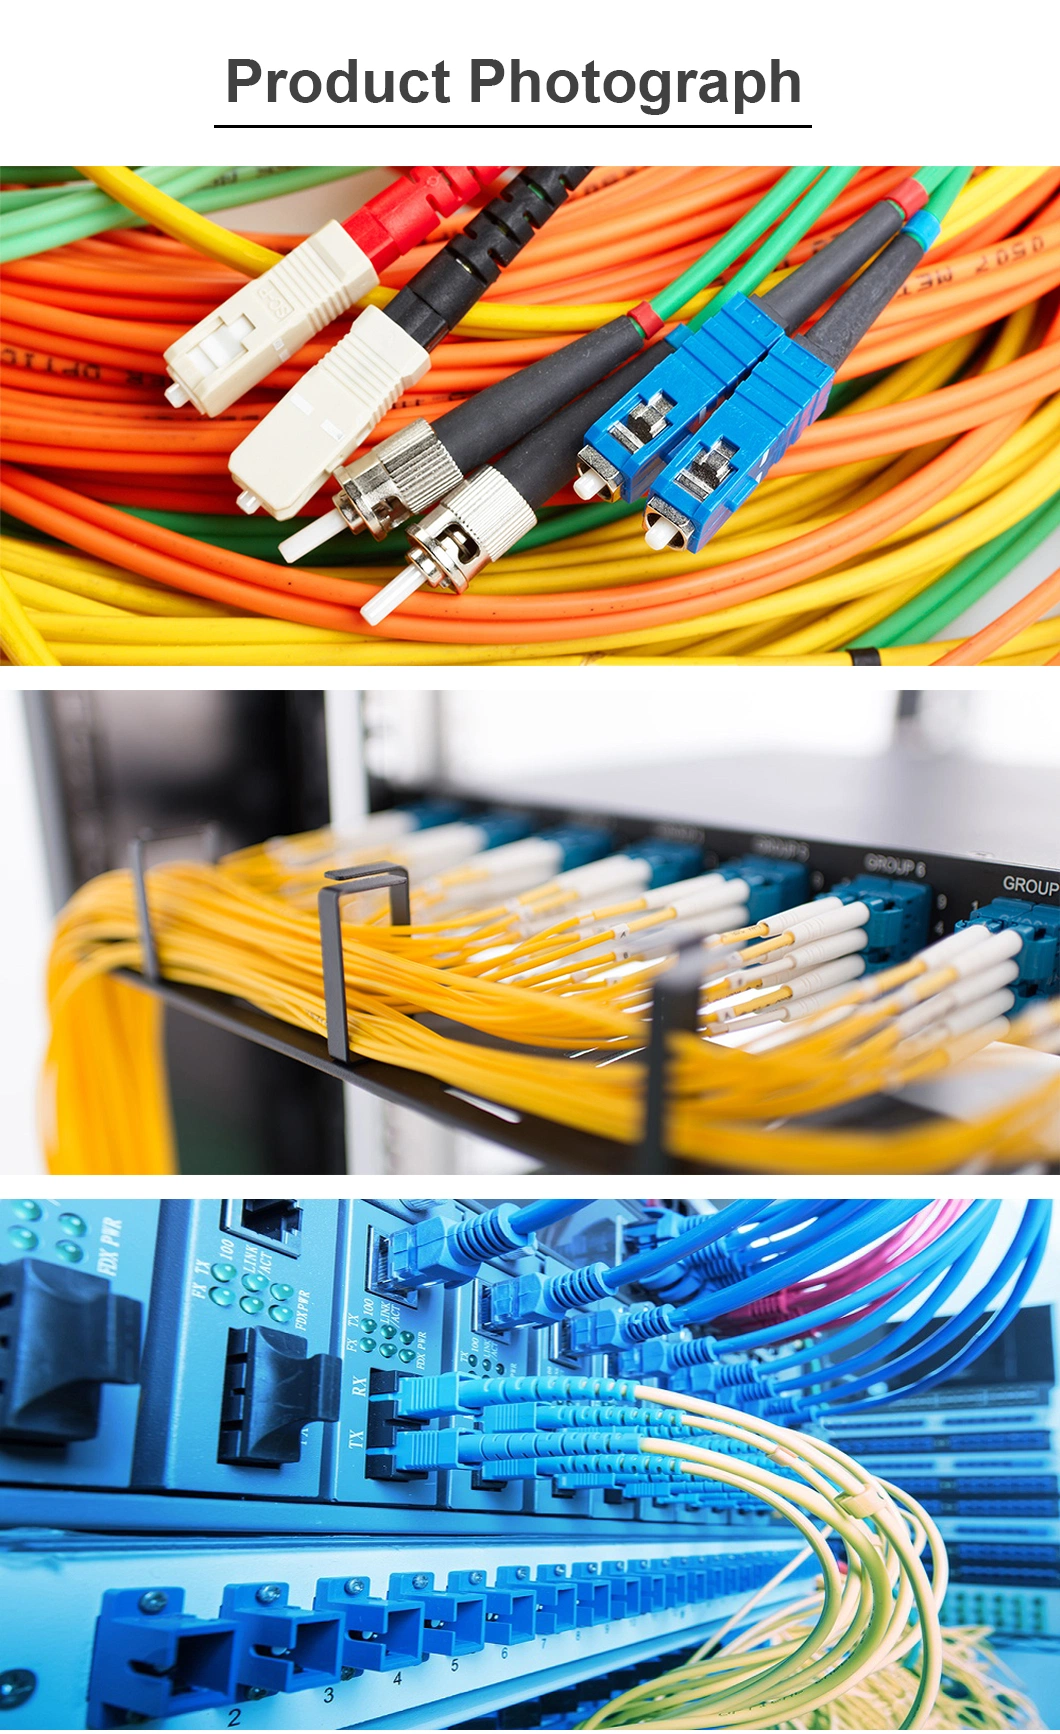 Low Loss Good Exchange Ability Cabling Fiber with RoHS G652D G657A1 G657A2